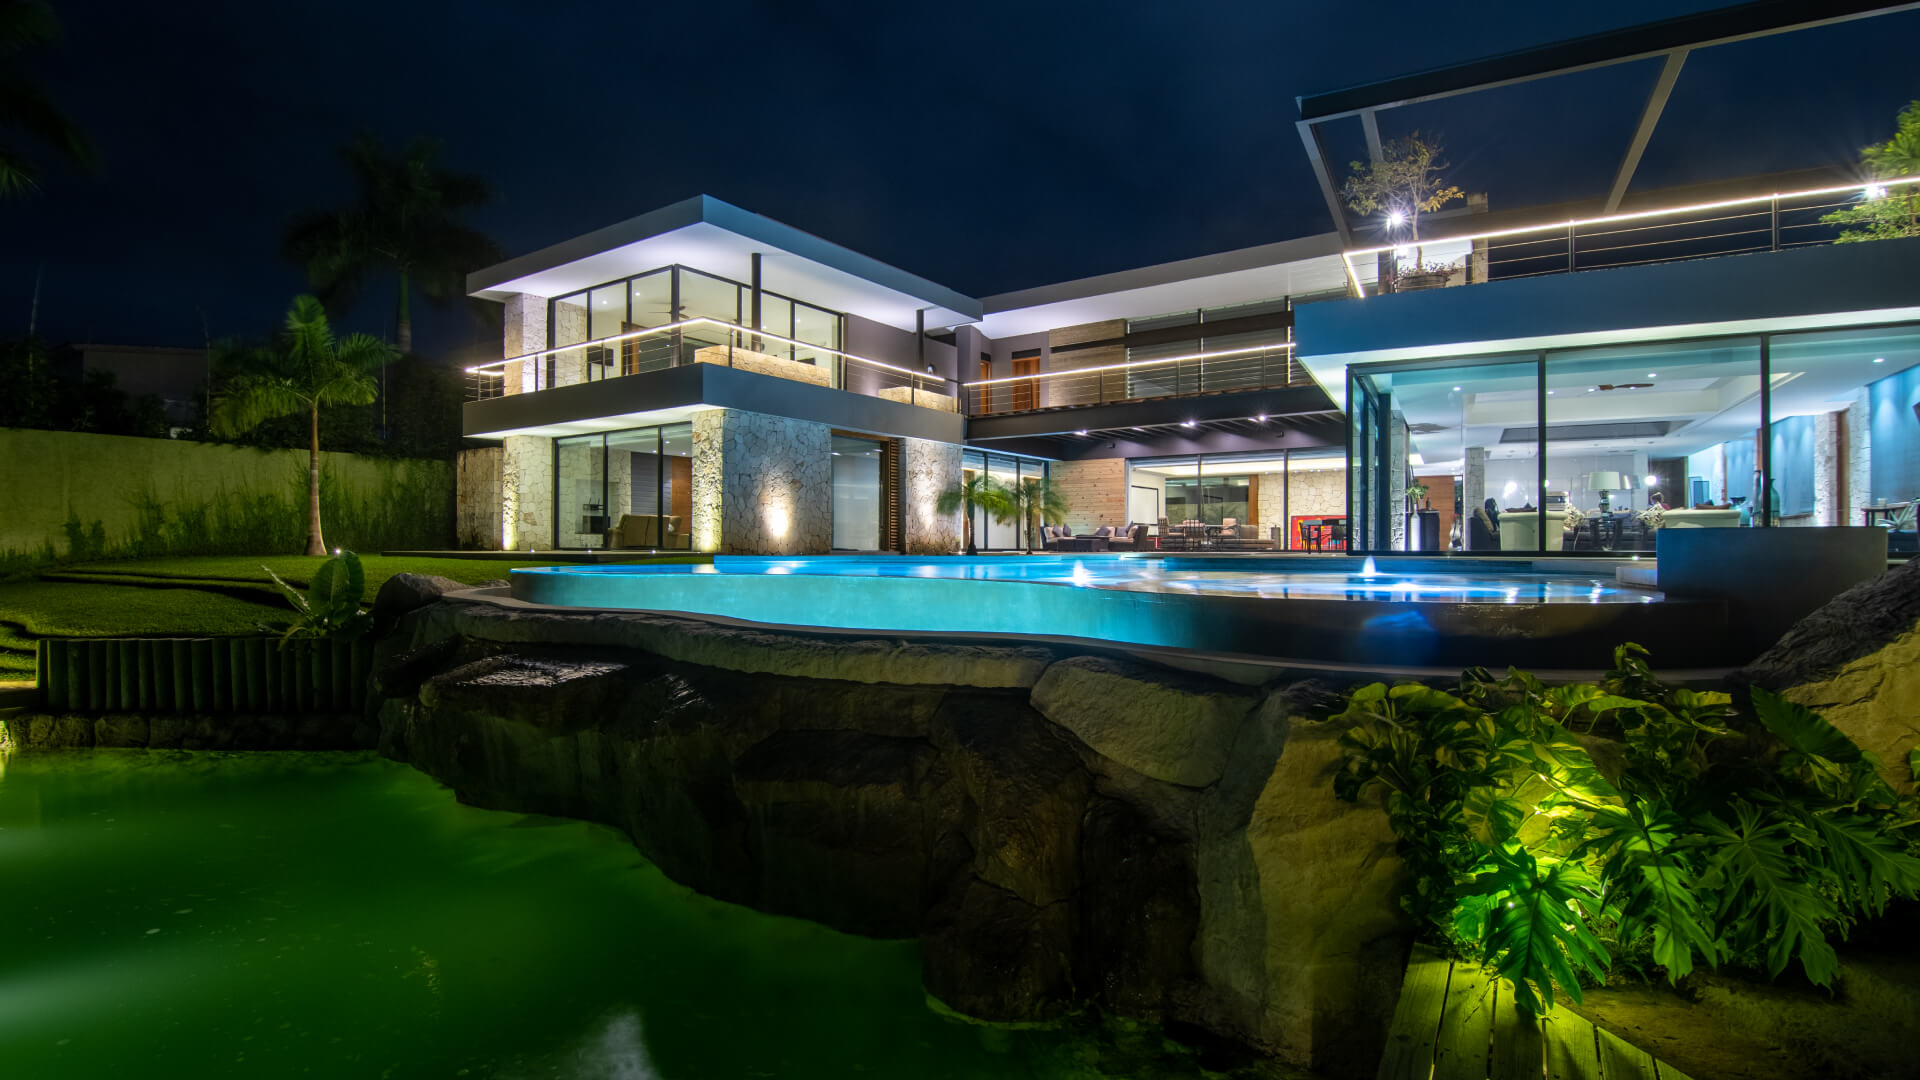 The Smartest Builder’s Cancun Project.